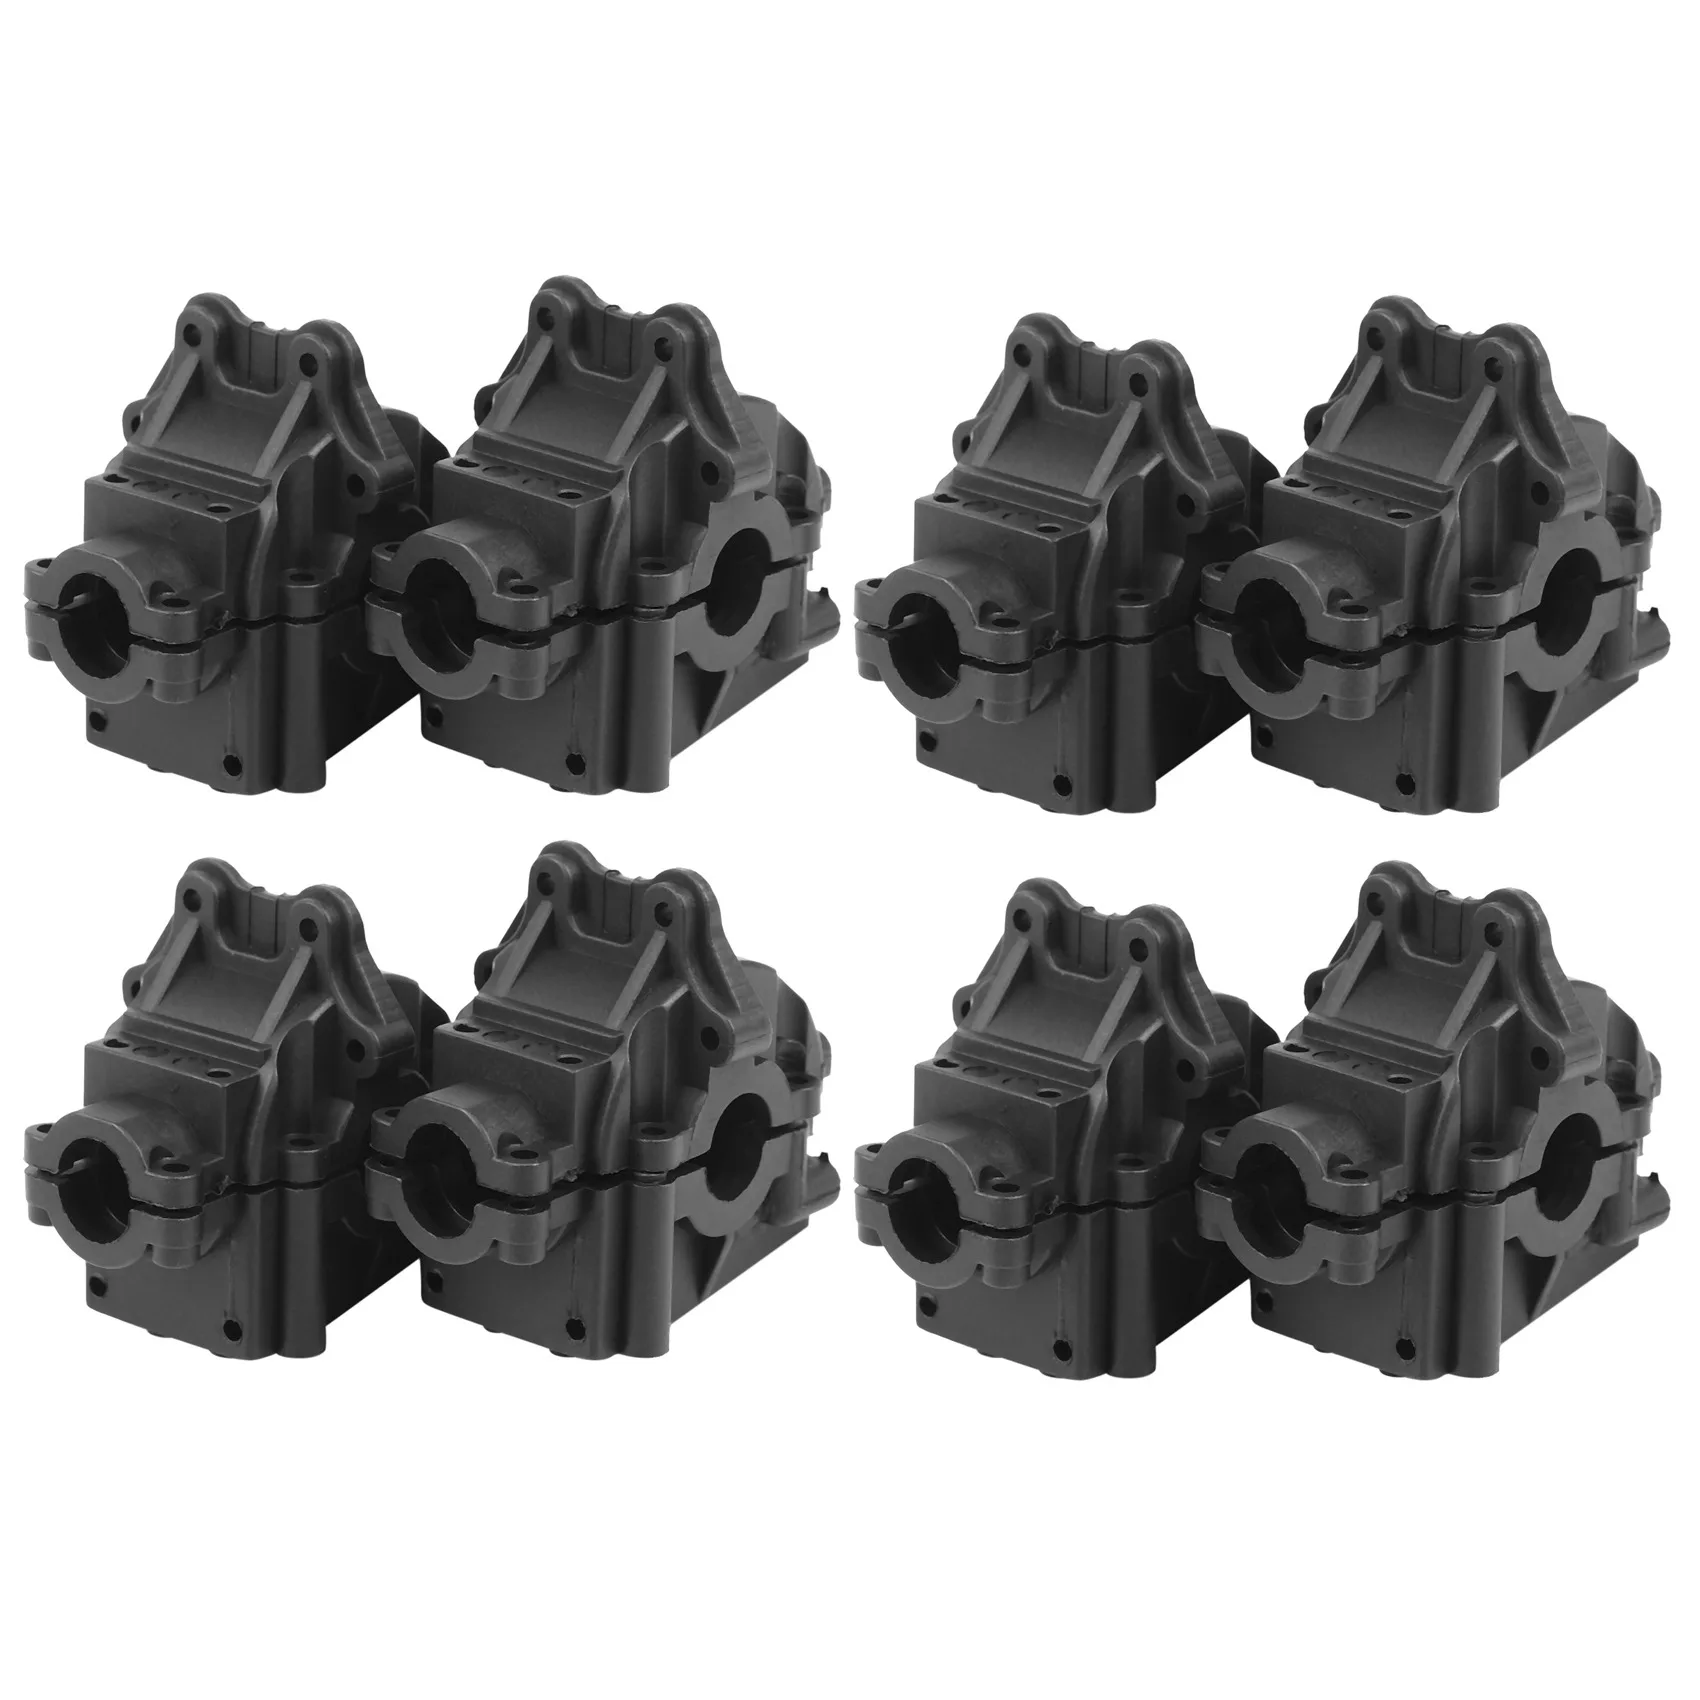 

8Pcs 144001-1254 Wave Box Gearbox for 144001 RC Car Spare Parts 4WD 1/14